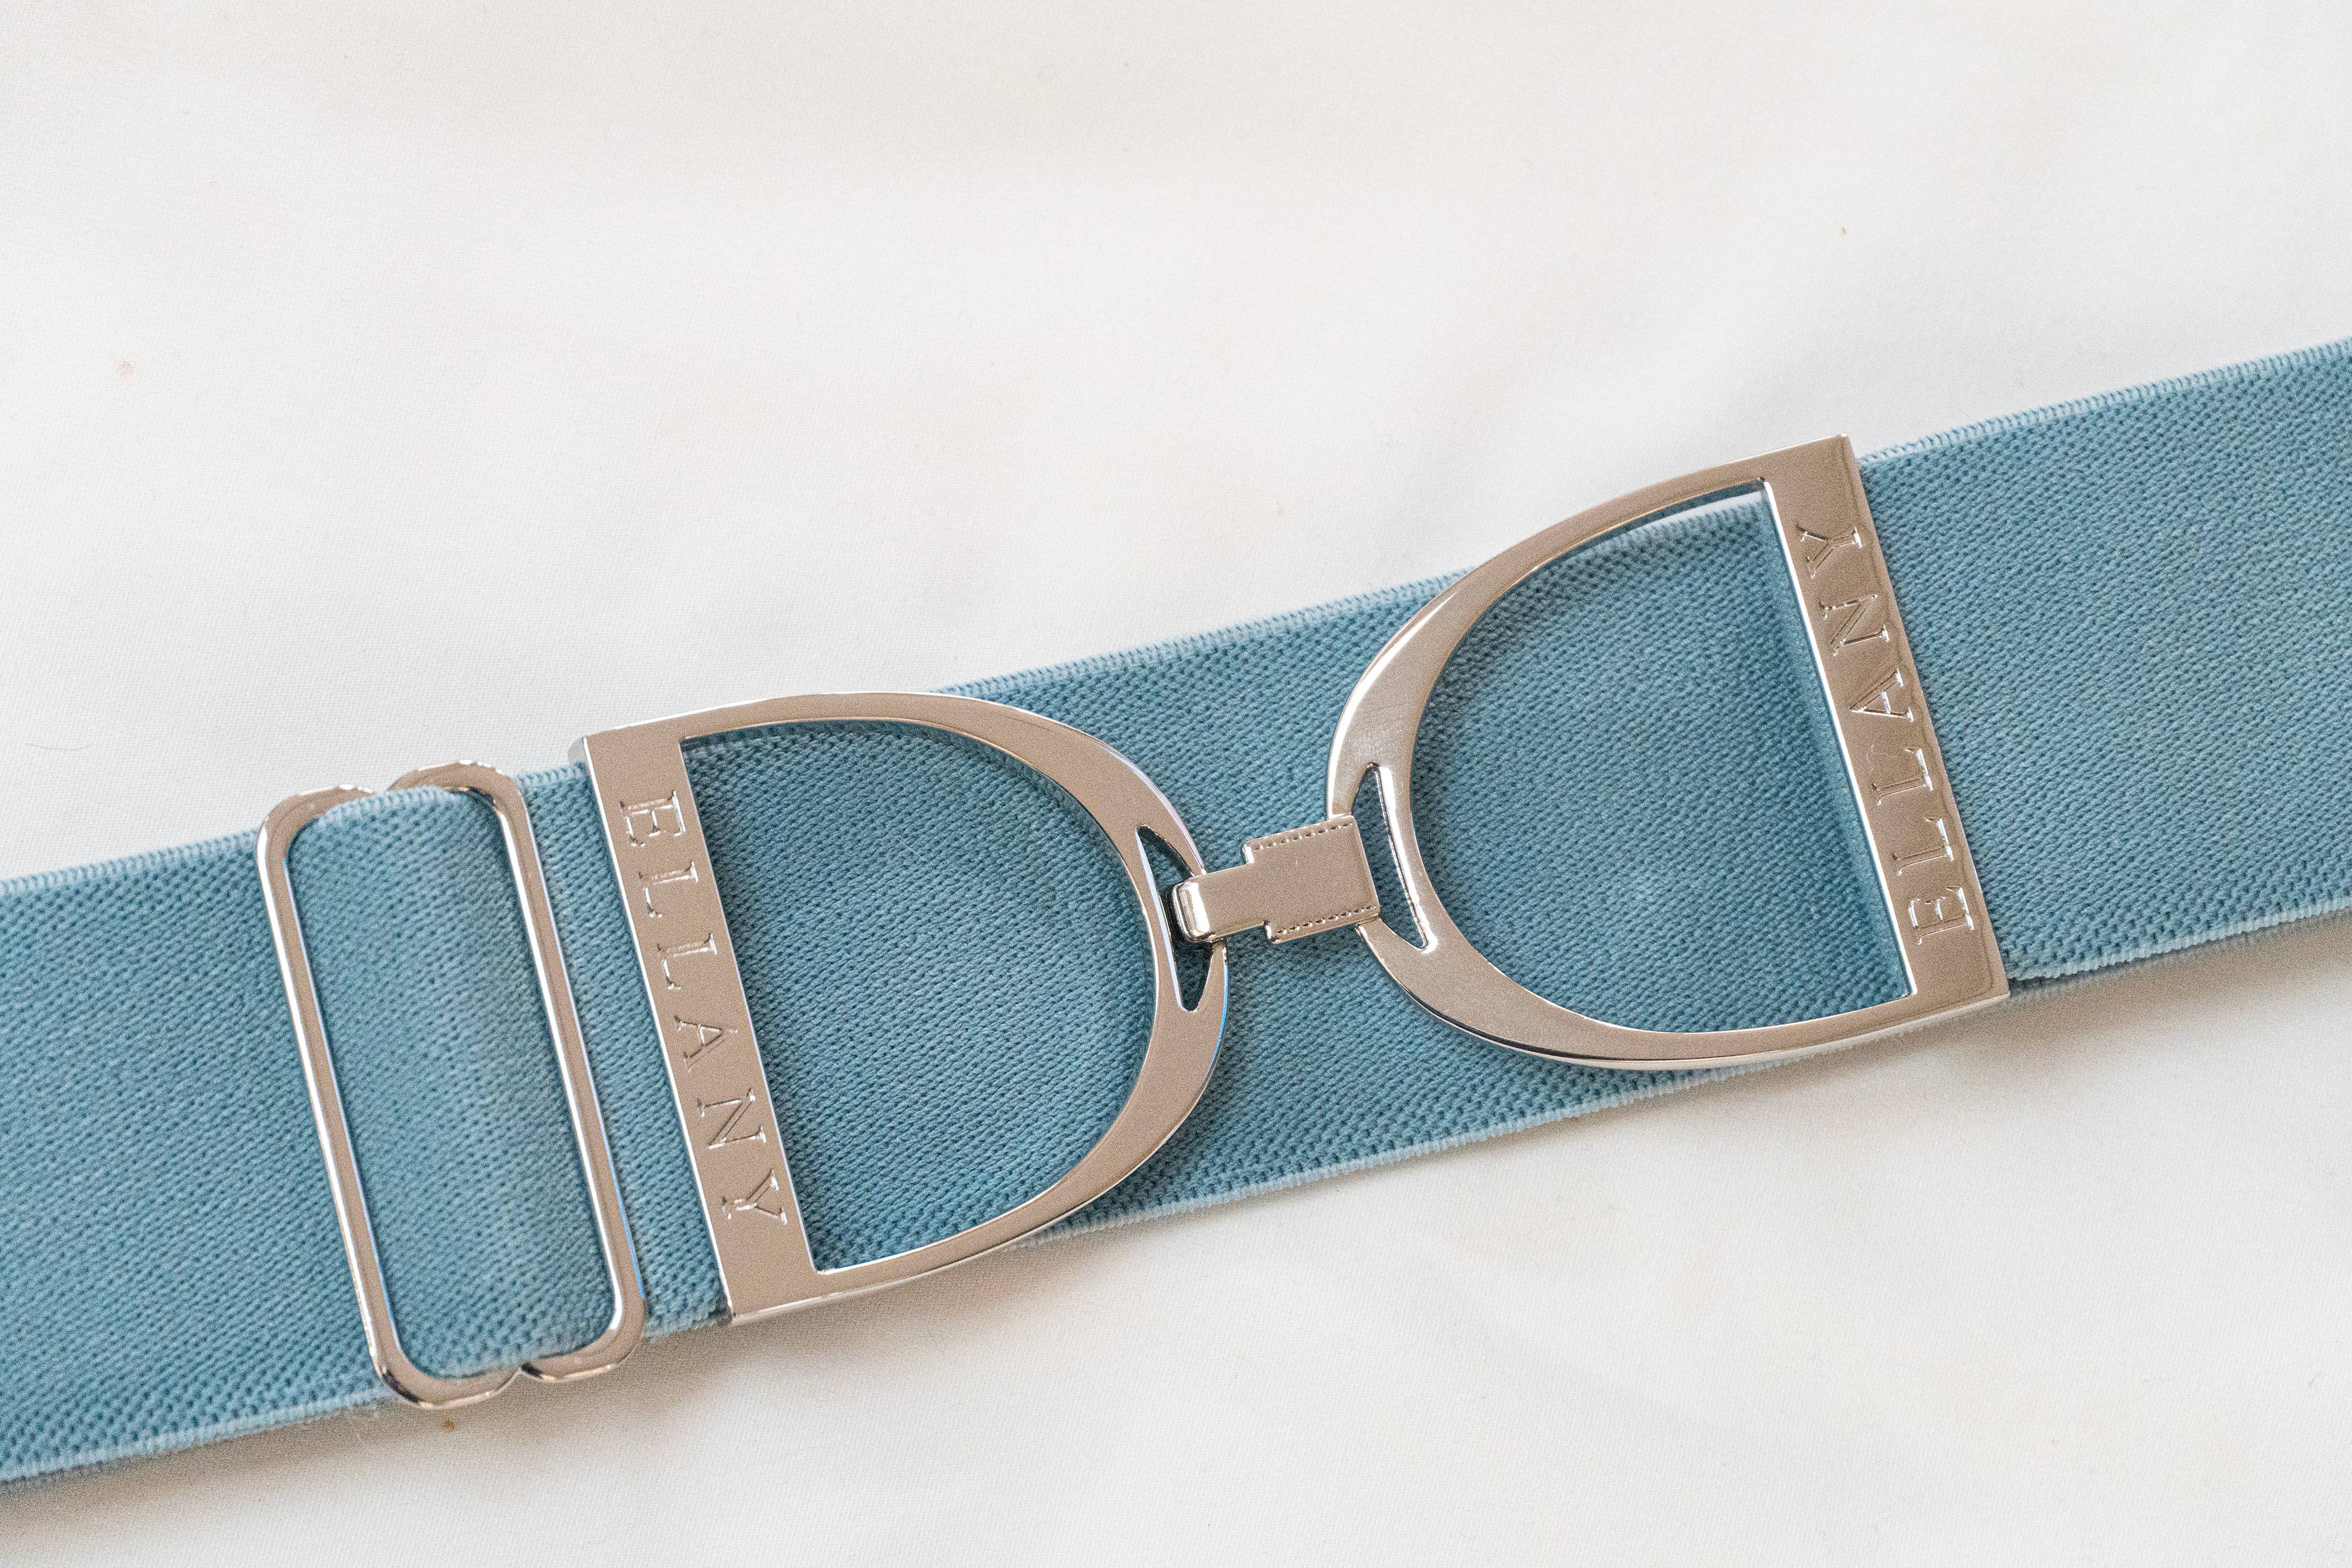 Noble Outfitters Back To Back Reversible Belt - SALE